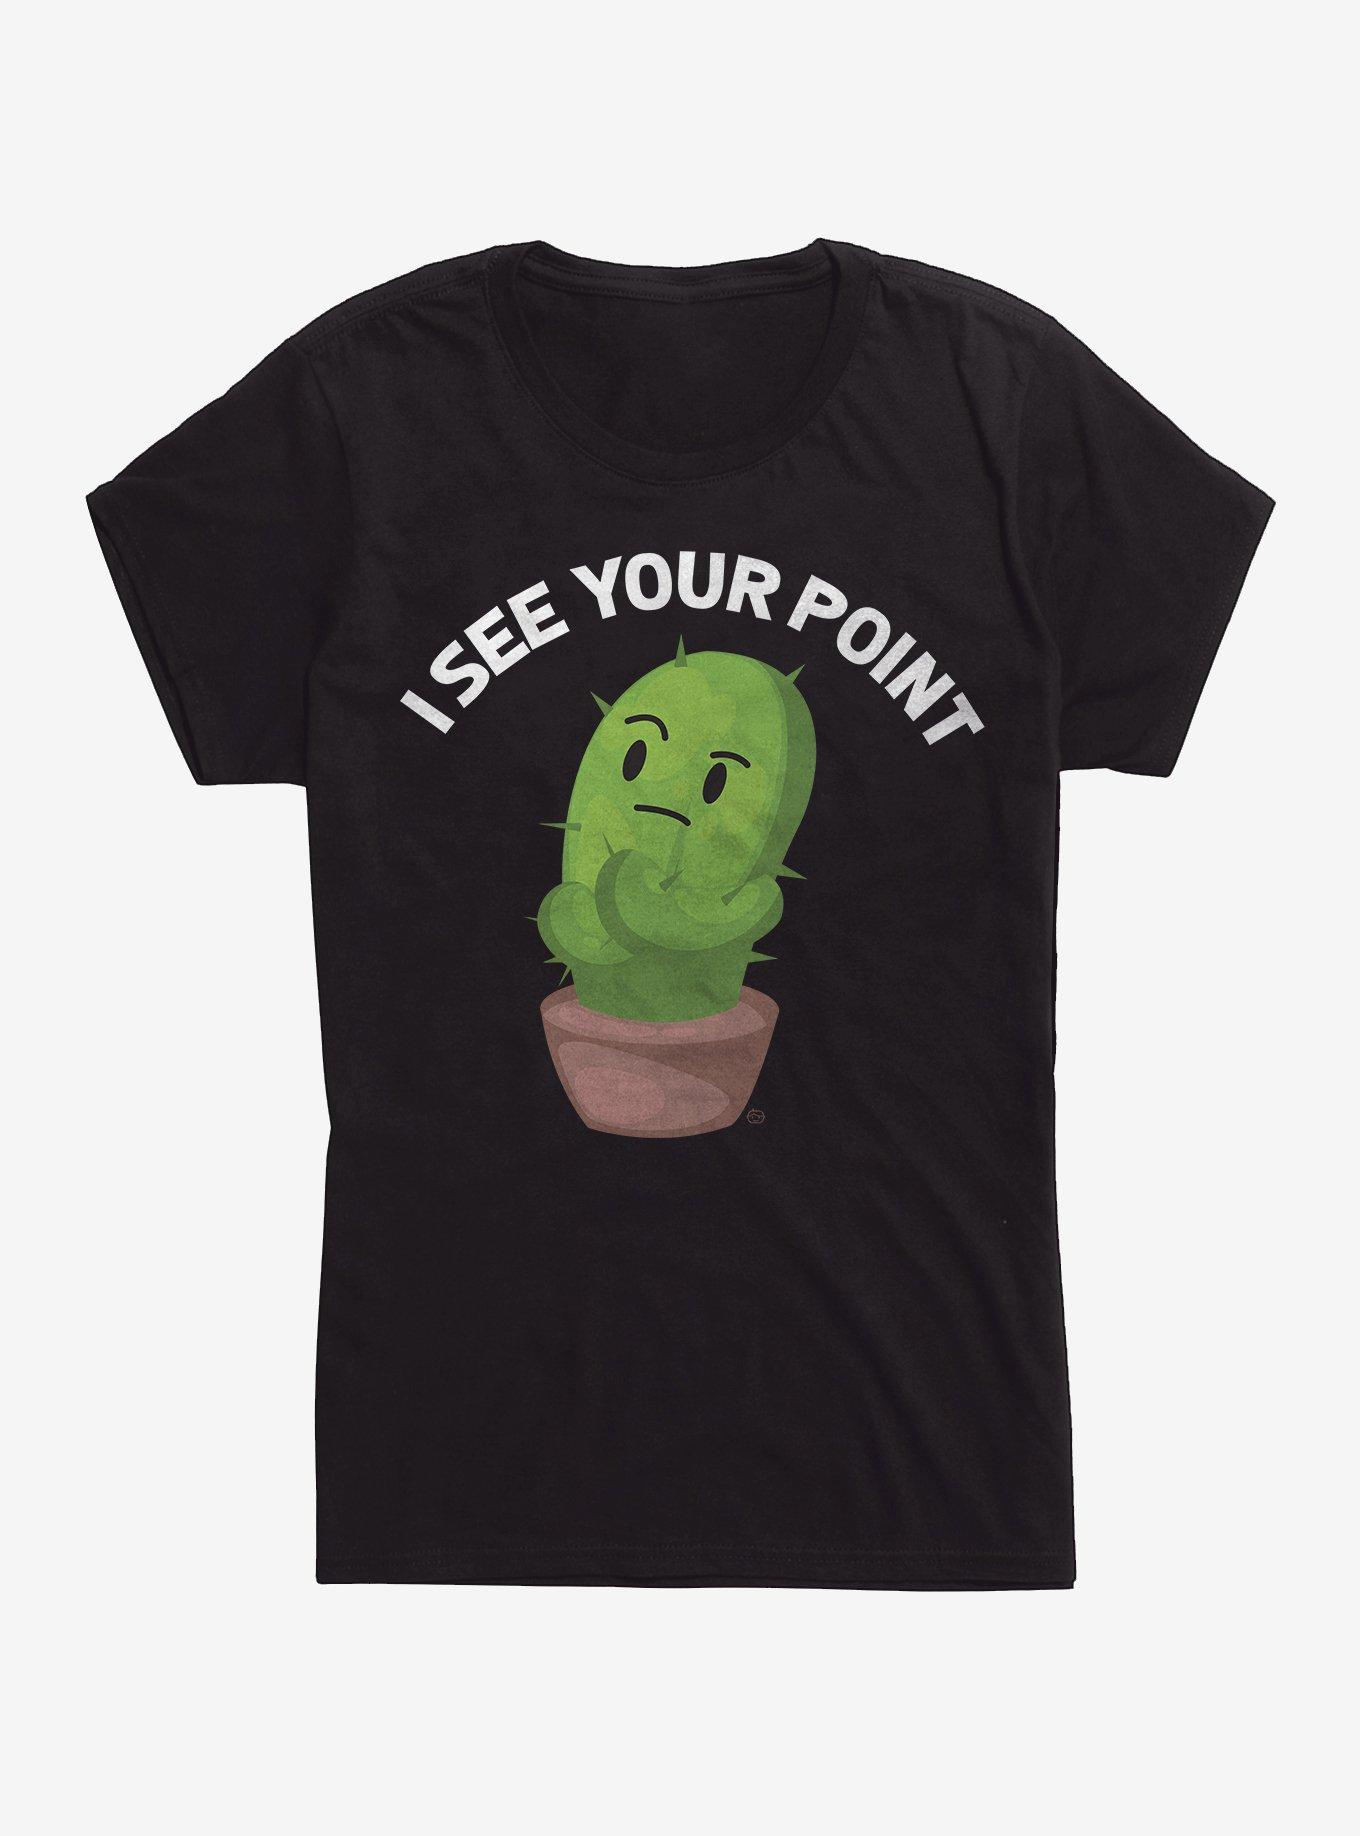 I See Your Point Cactus Girls T-Shirt, BLACK, hi-res